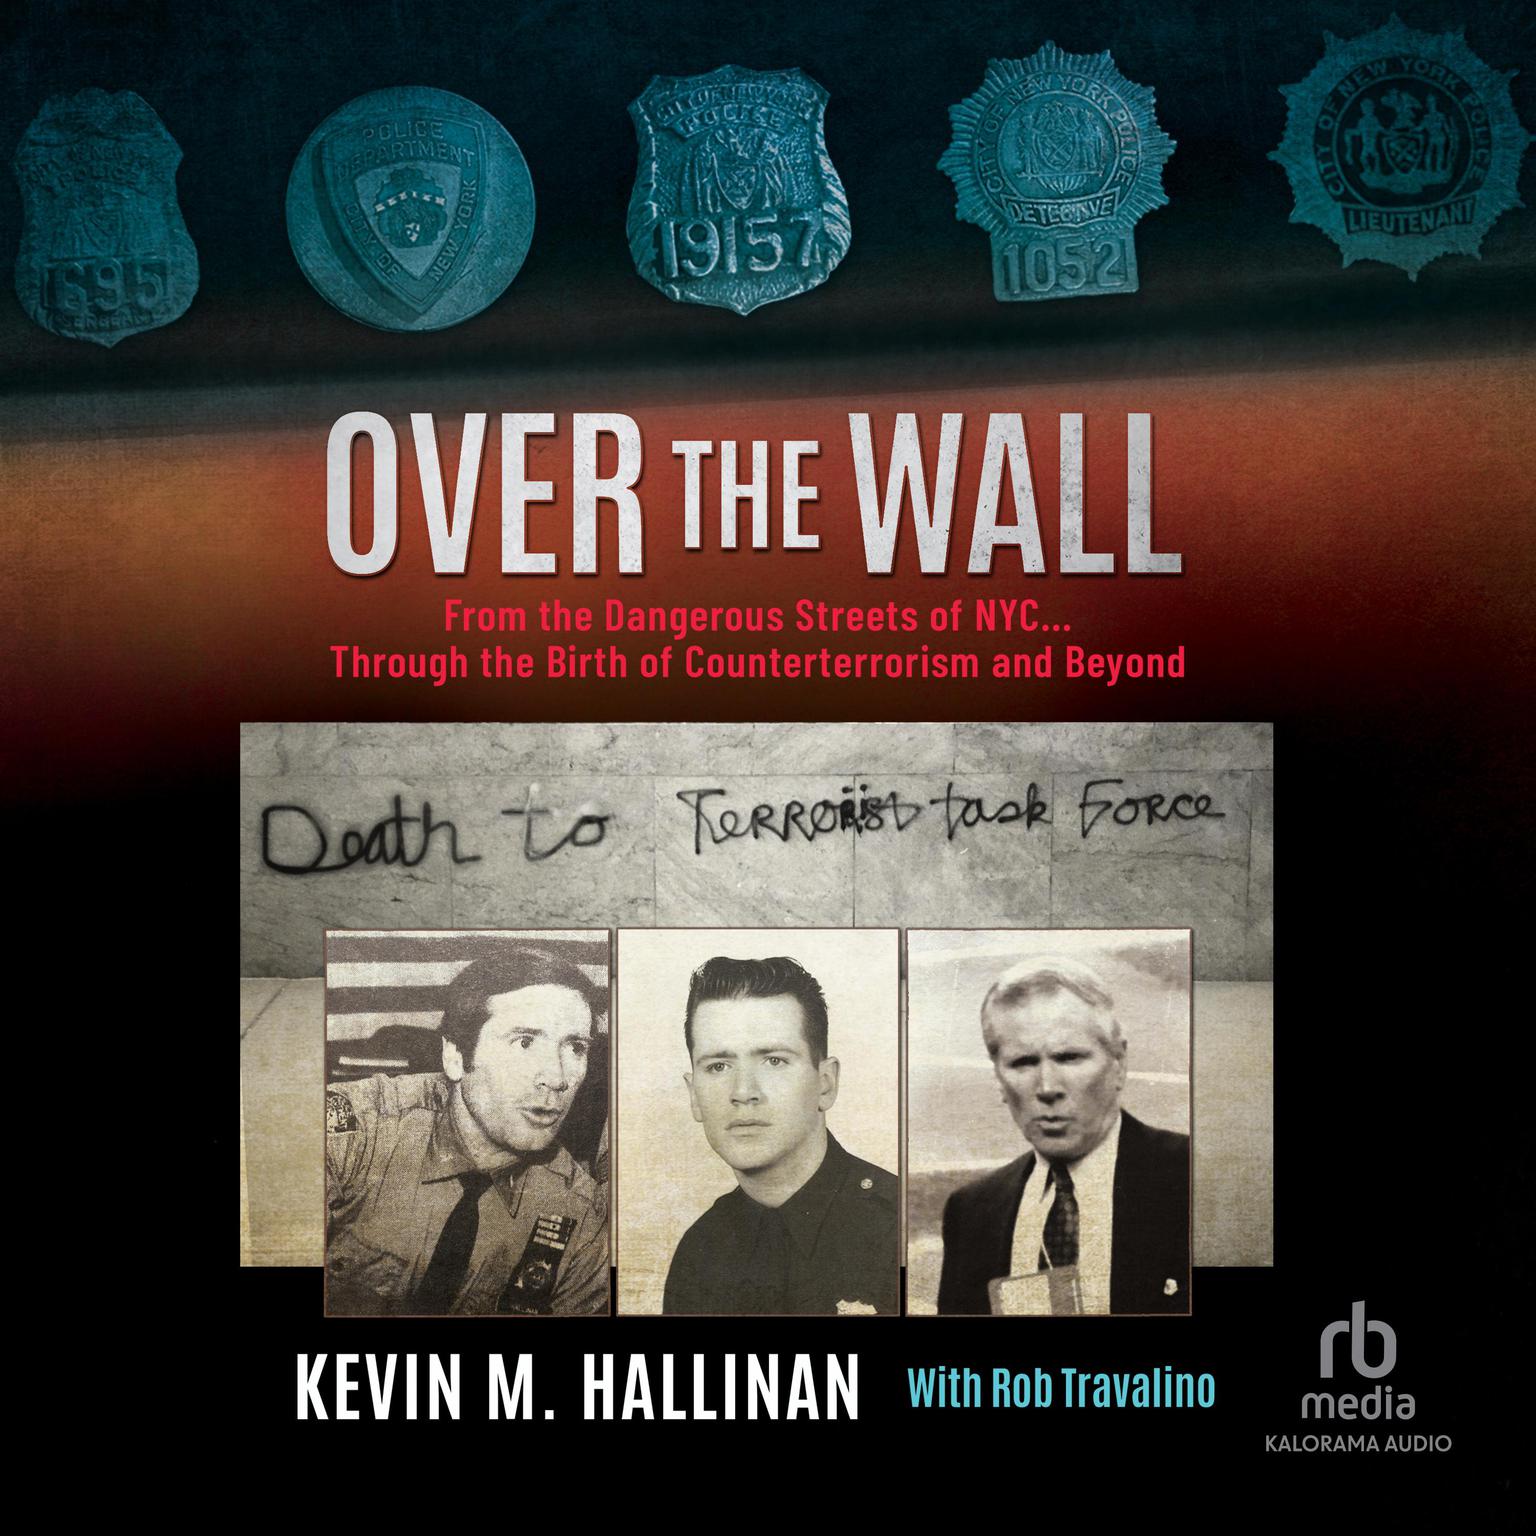 Over the Wall: From the Dangerous Streets of NYC…Through the Birth of Counterterrorism and Beyond Audiobook, by Kevin M. Hallinan